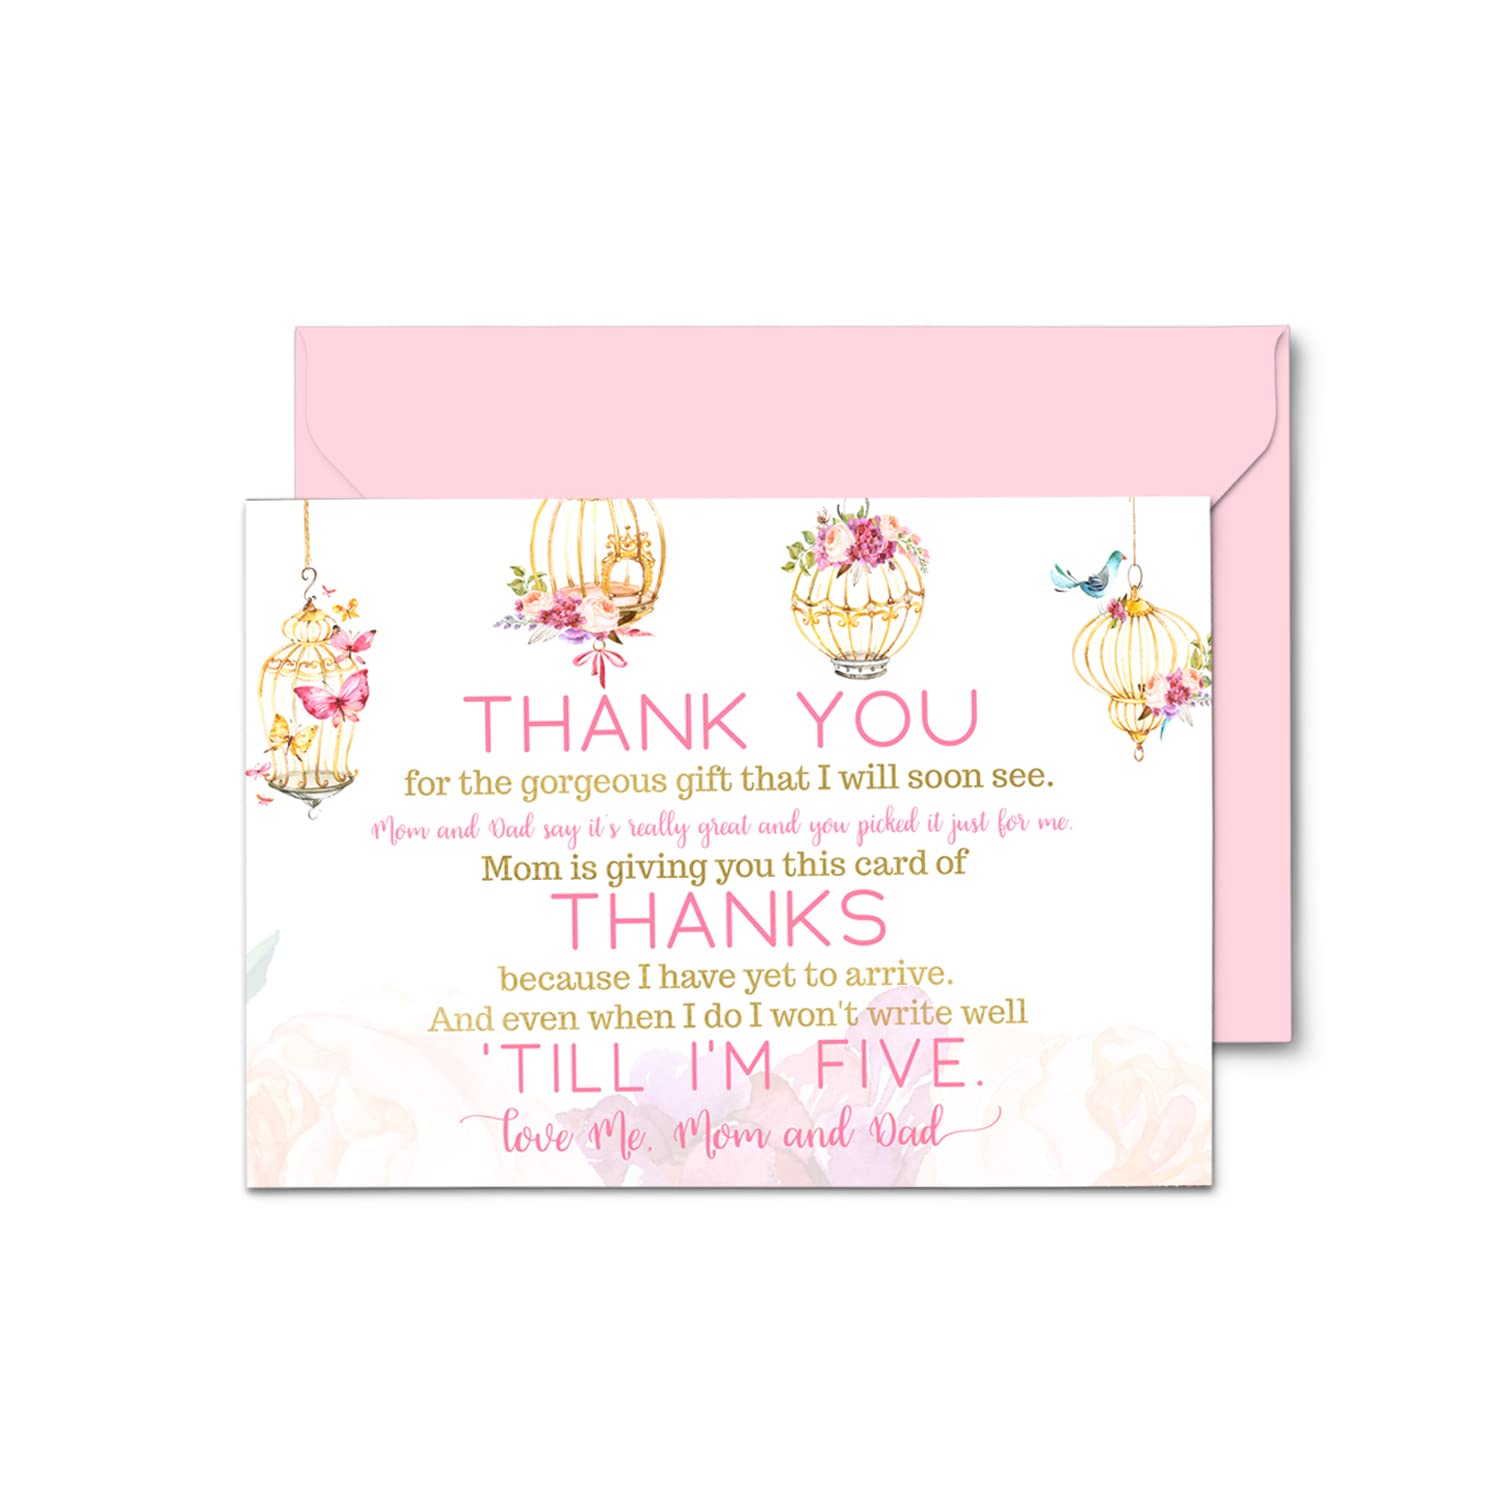 Paper Clever Party Fancy Floral Baby Shower Thank You Cards with Envelopes (15 Pack) Prewritten Message from Girls Individual Notecards Blank Pink and Gold 4x6 Stationery Set